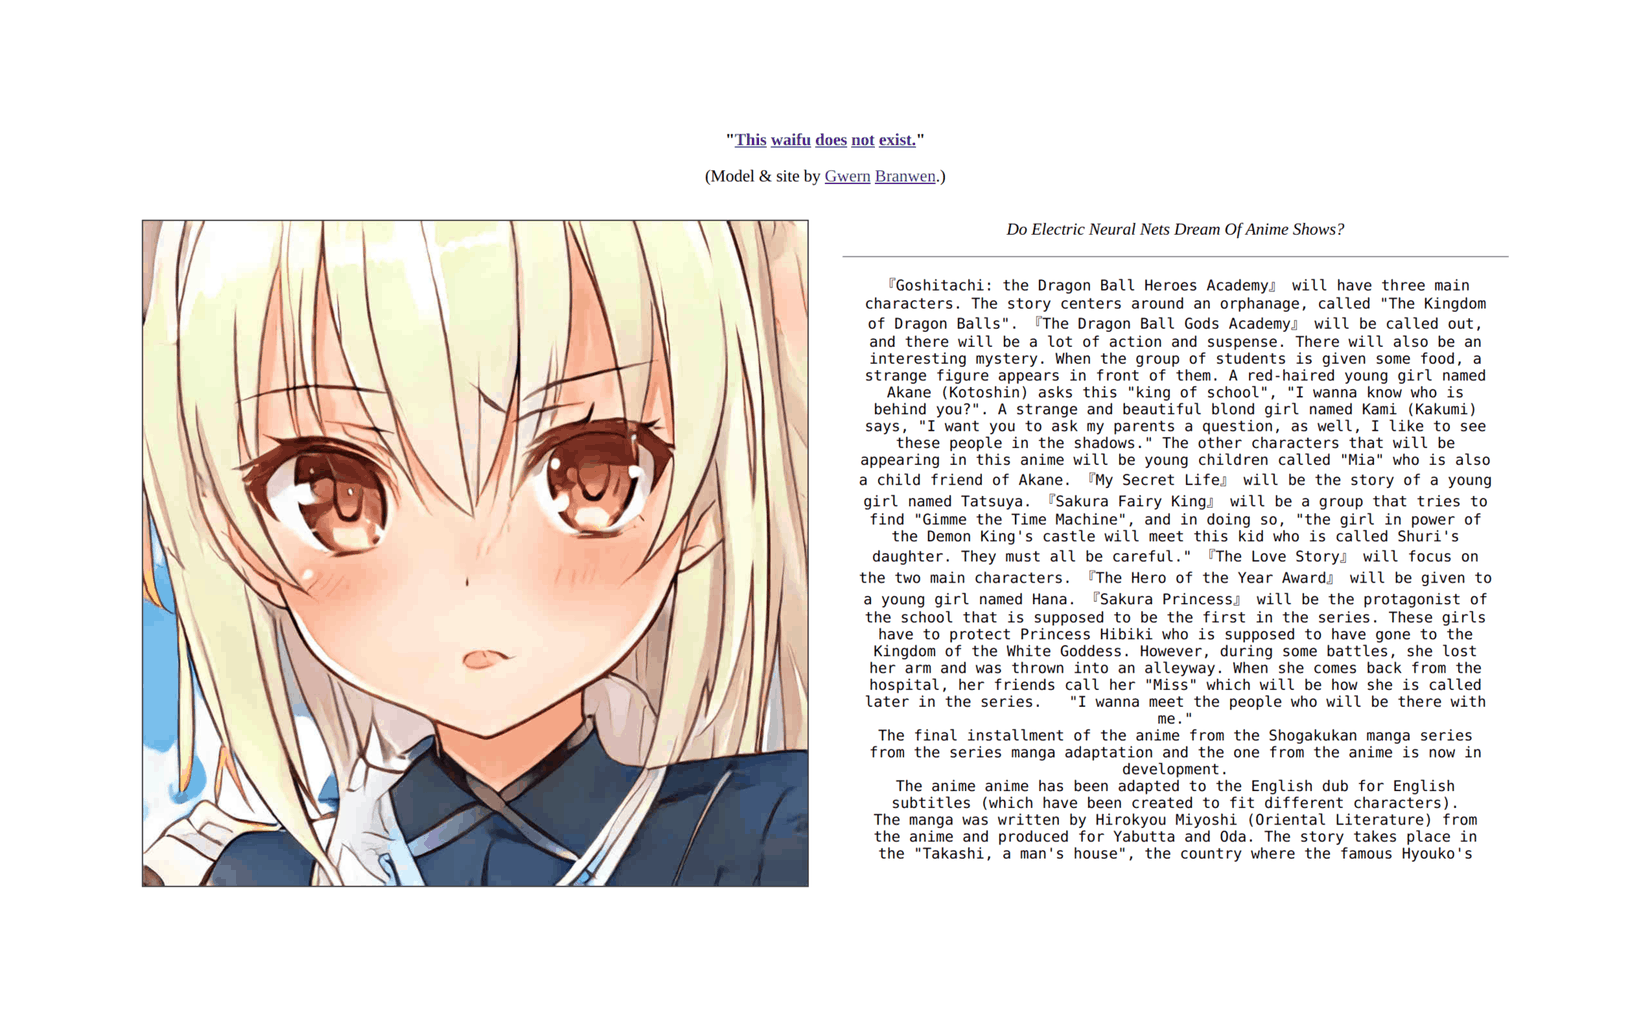 A screenshot of “This Waifu Does Not Exist” (TWDNE) showing a random StyleGAN-generated anime face and a random GPT-2-117M text sample conditioned on anime keywords/​phrases.